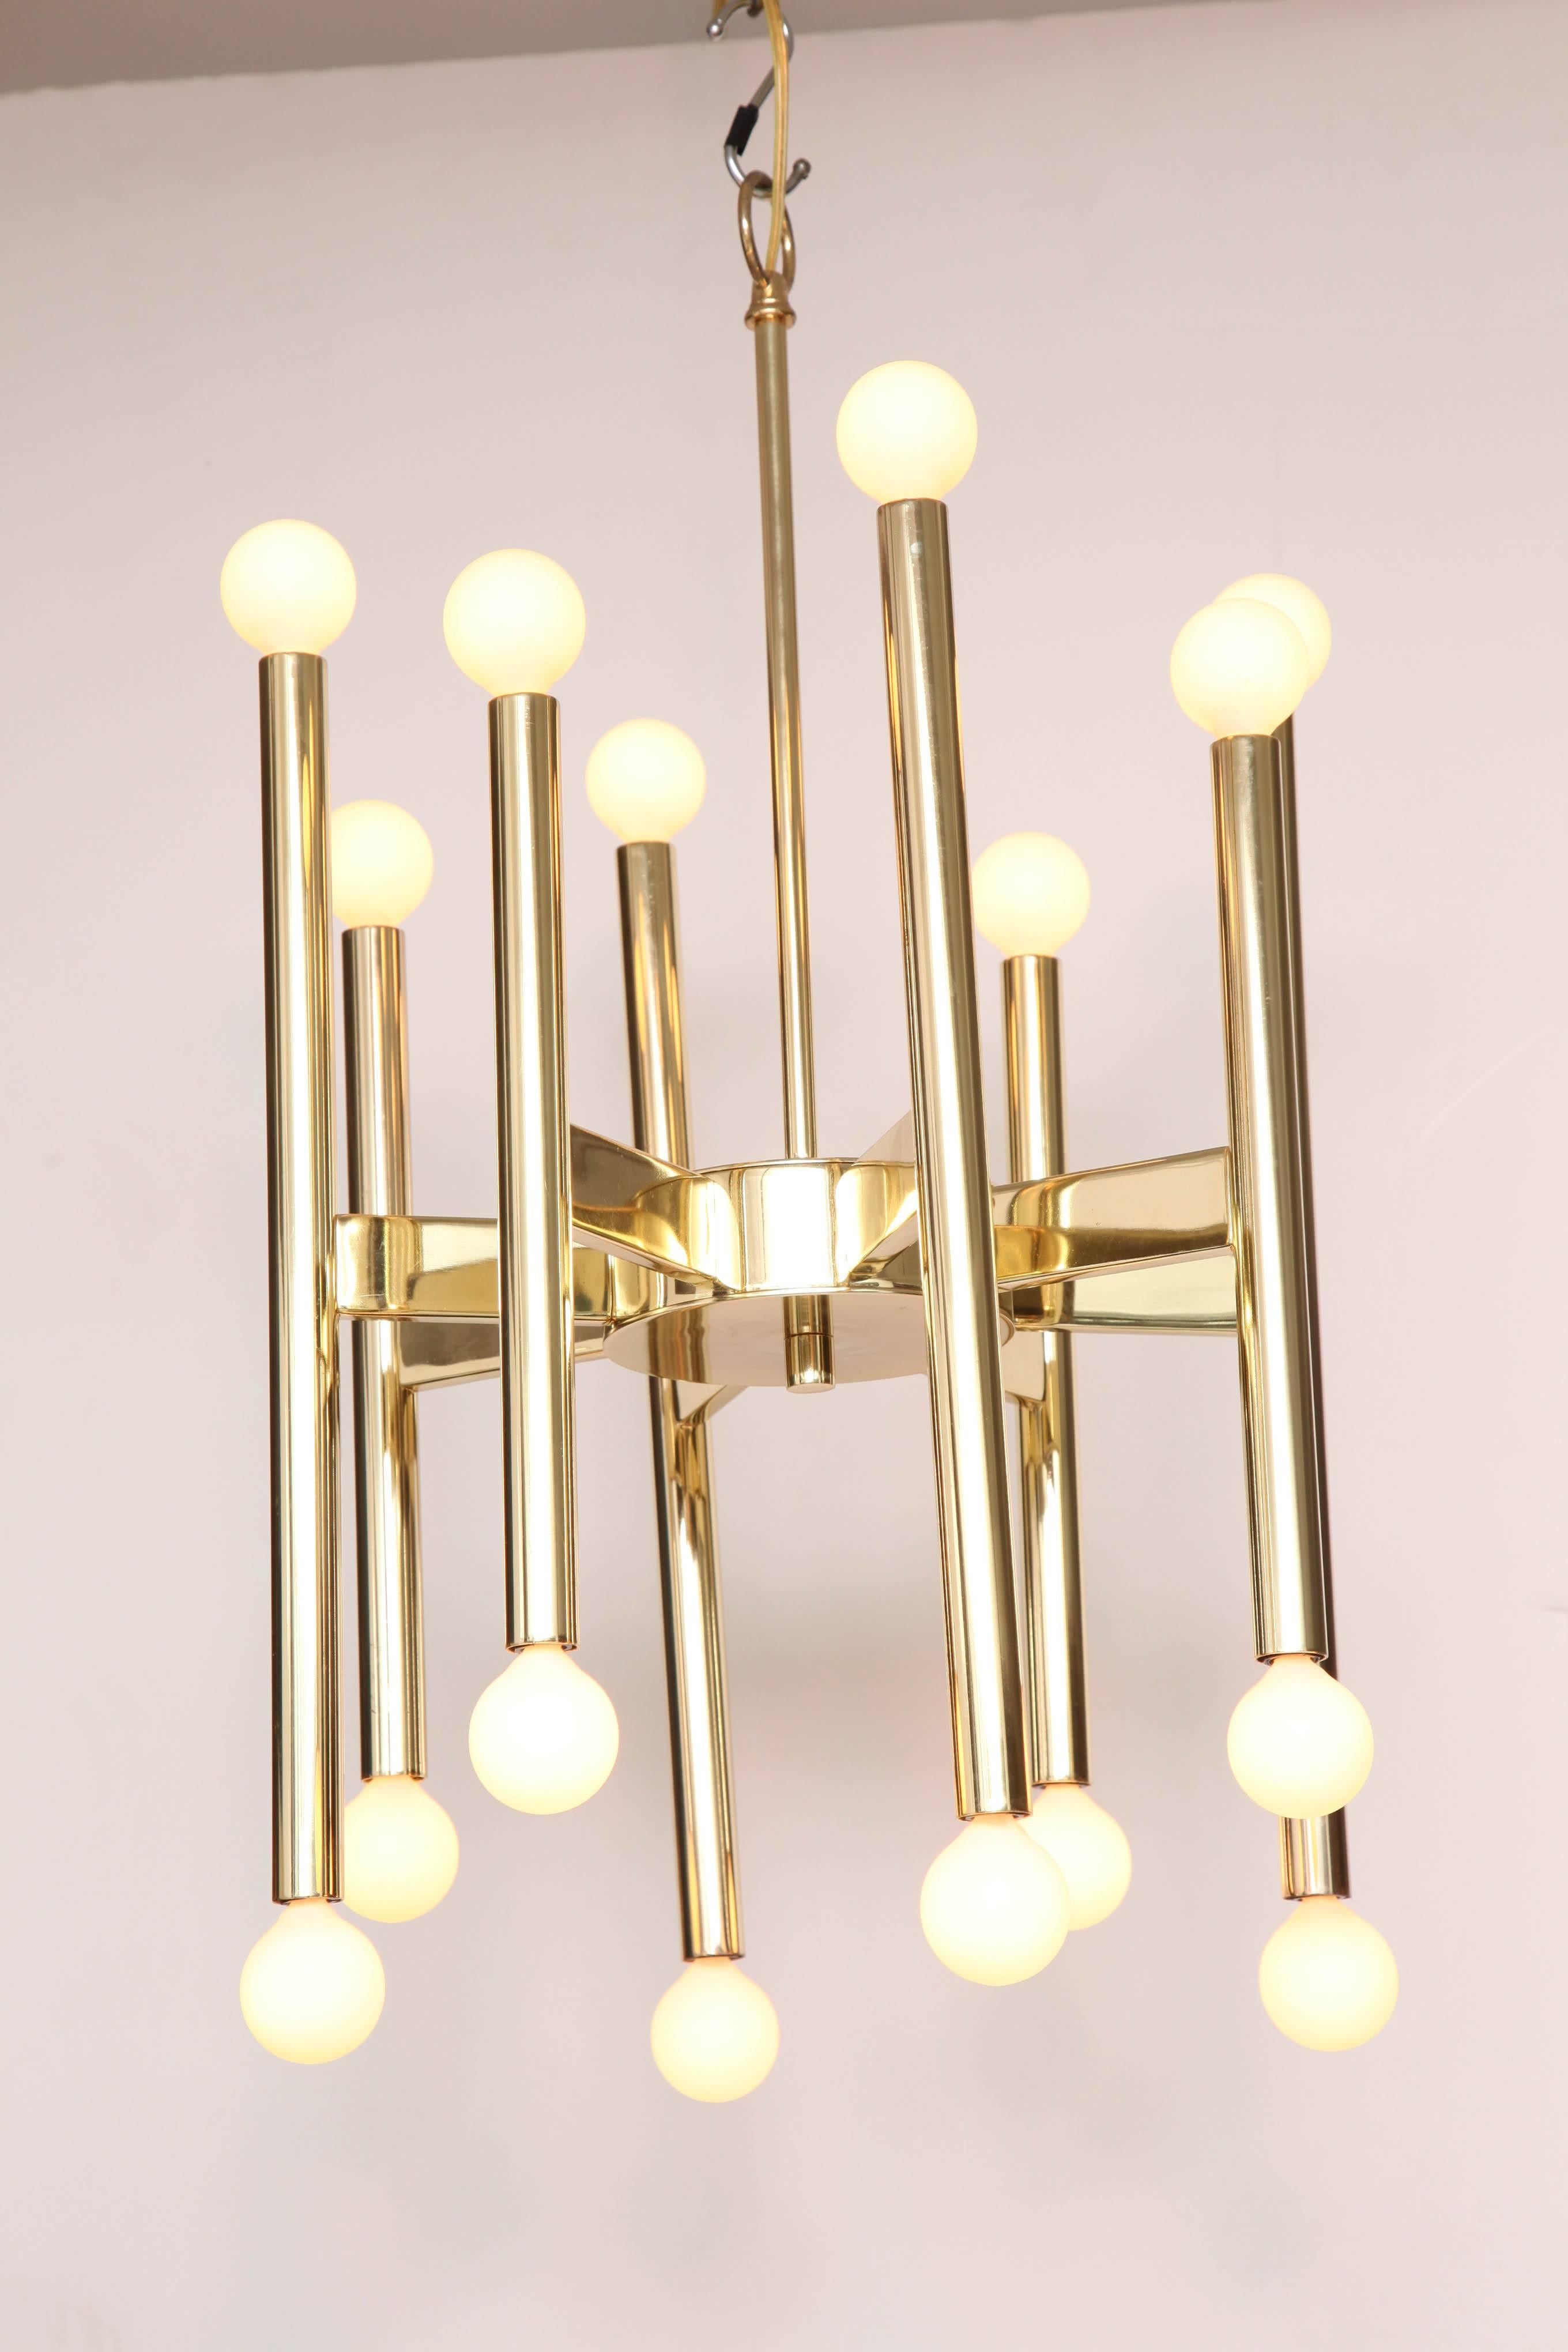 A sixteen-arm chandelier in polished brass by Gaetano Sciolari for Lightolier, USA, circa 1950. Newly restored and rewired for US; in exceptional condition. Takes 16 candelabra base bulbs, 40 watts max each. Includes hanging chain.

Dimensions: 16